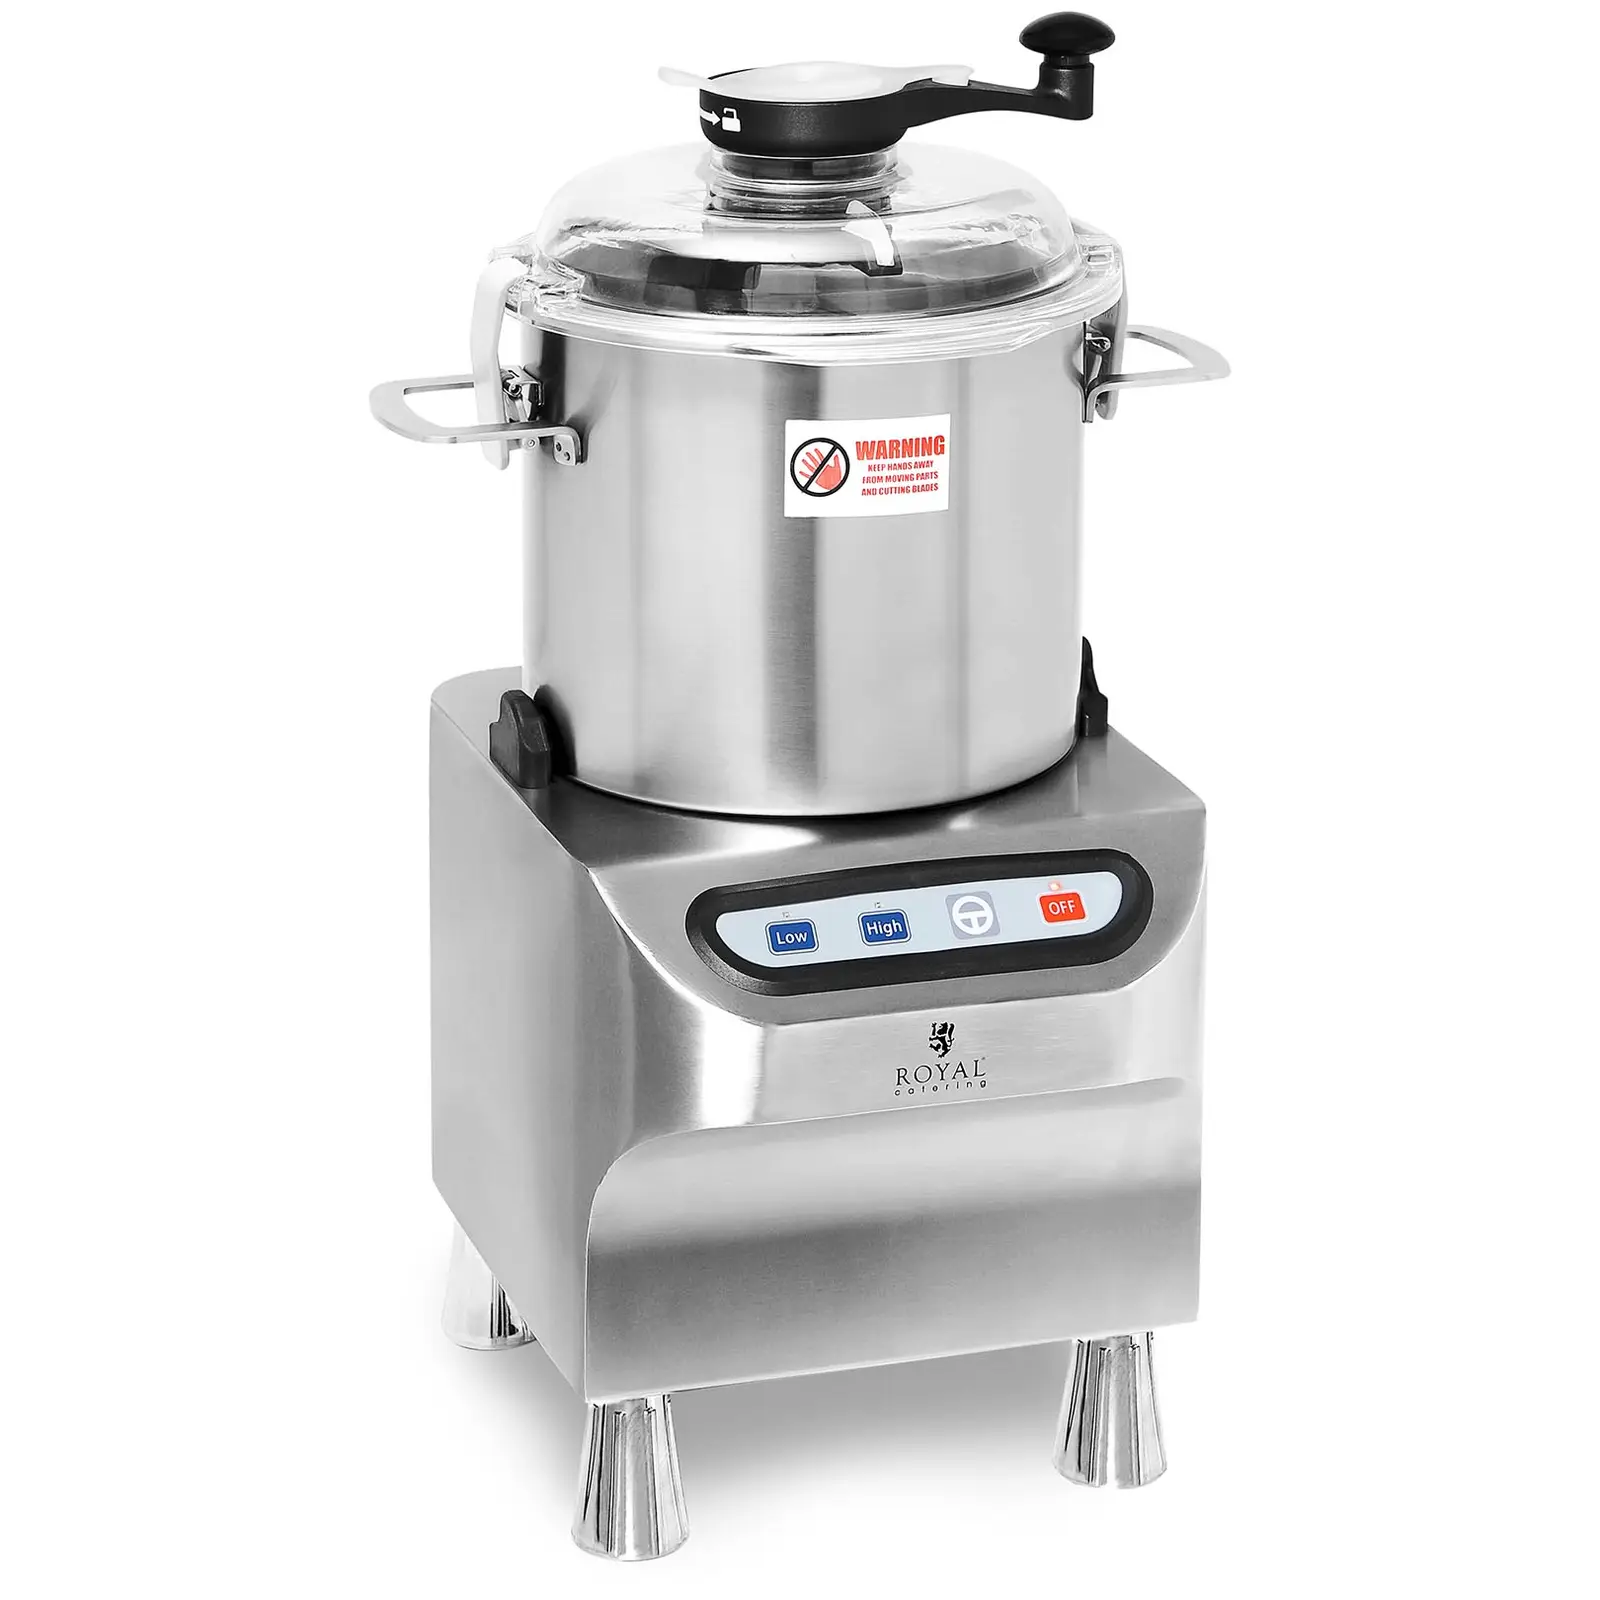 Smulkinimo dubuo - 1500/2800 aps./min. - „Royal Catering“ - 8 l